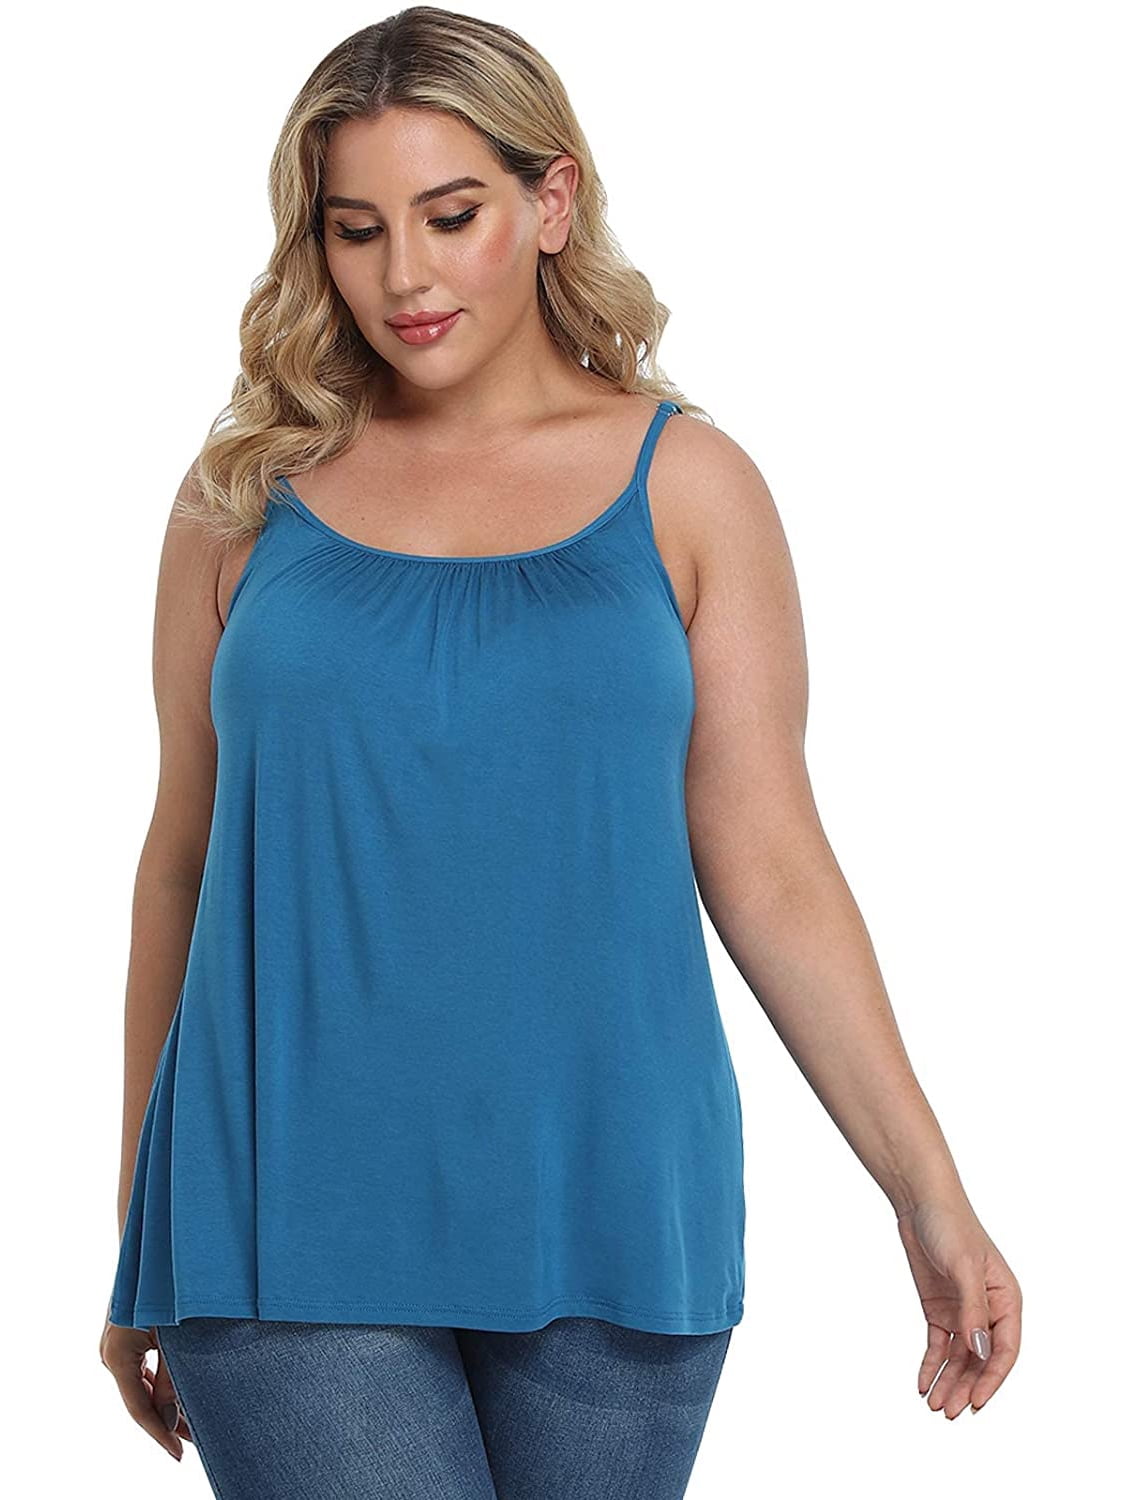 S-4XL Women's Cami with Built in Bra Cup Casual Flowy Swing Pleated Tank Top with Adjustable Strap 